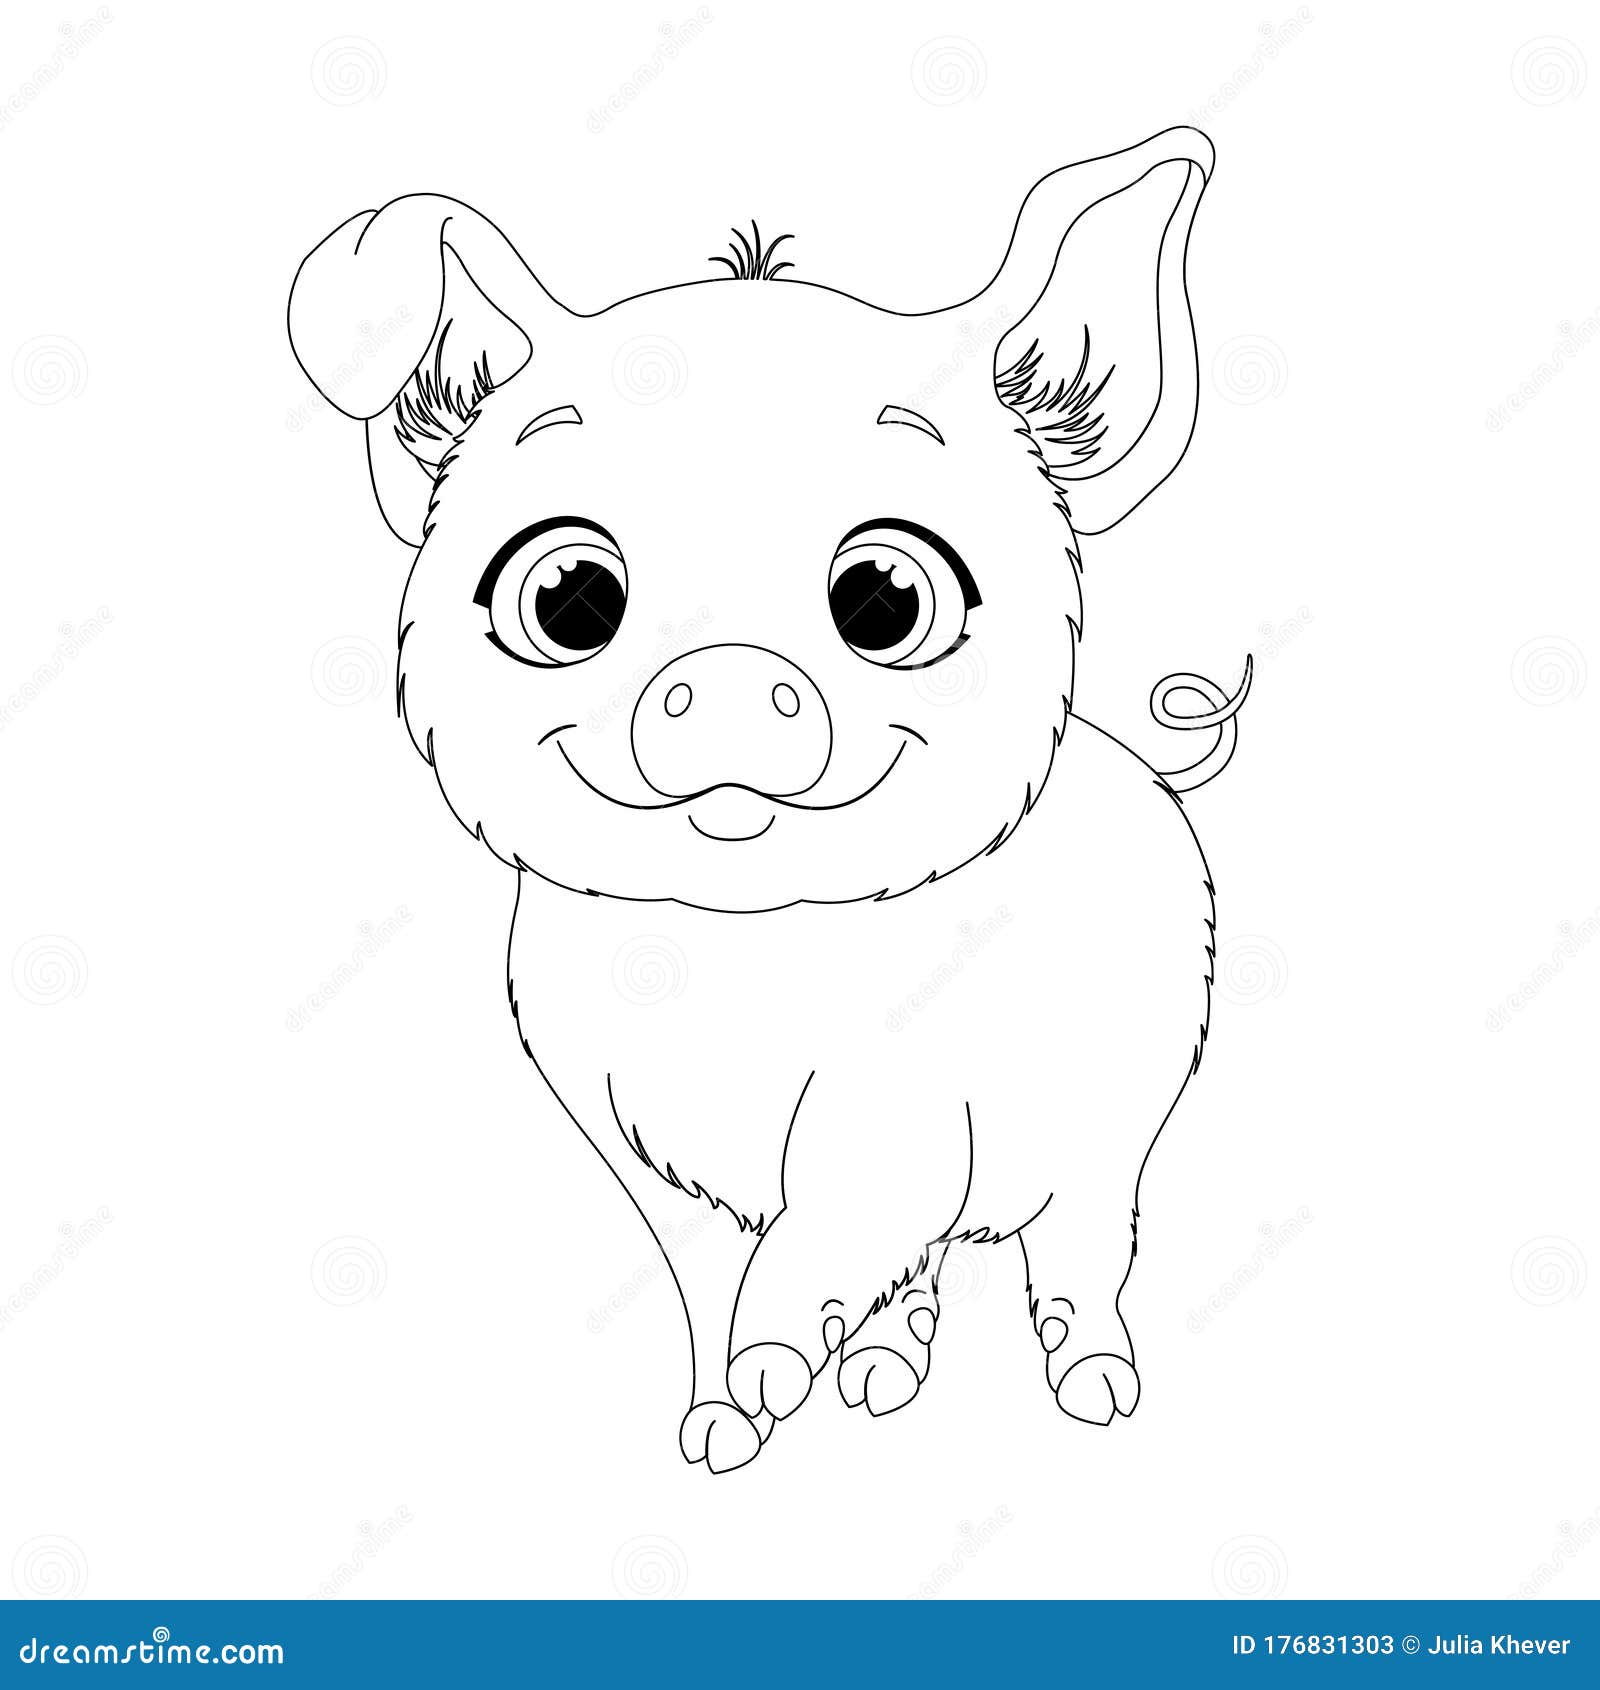 Coloring Page for Kids with Little Pig. Stock Vector ...